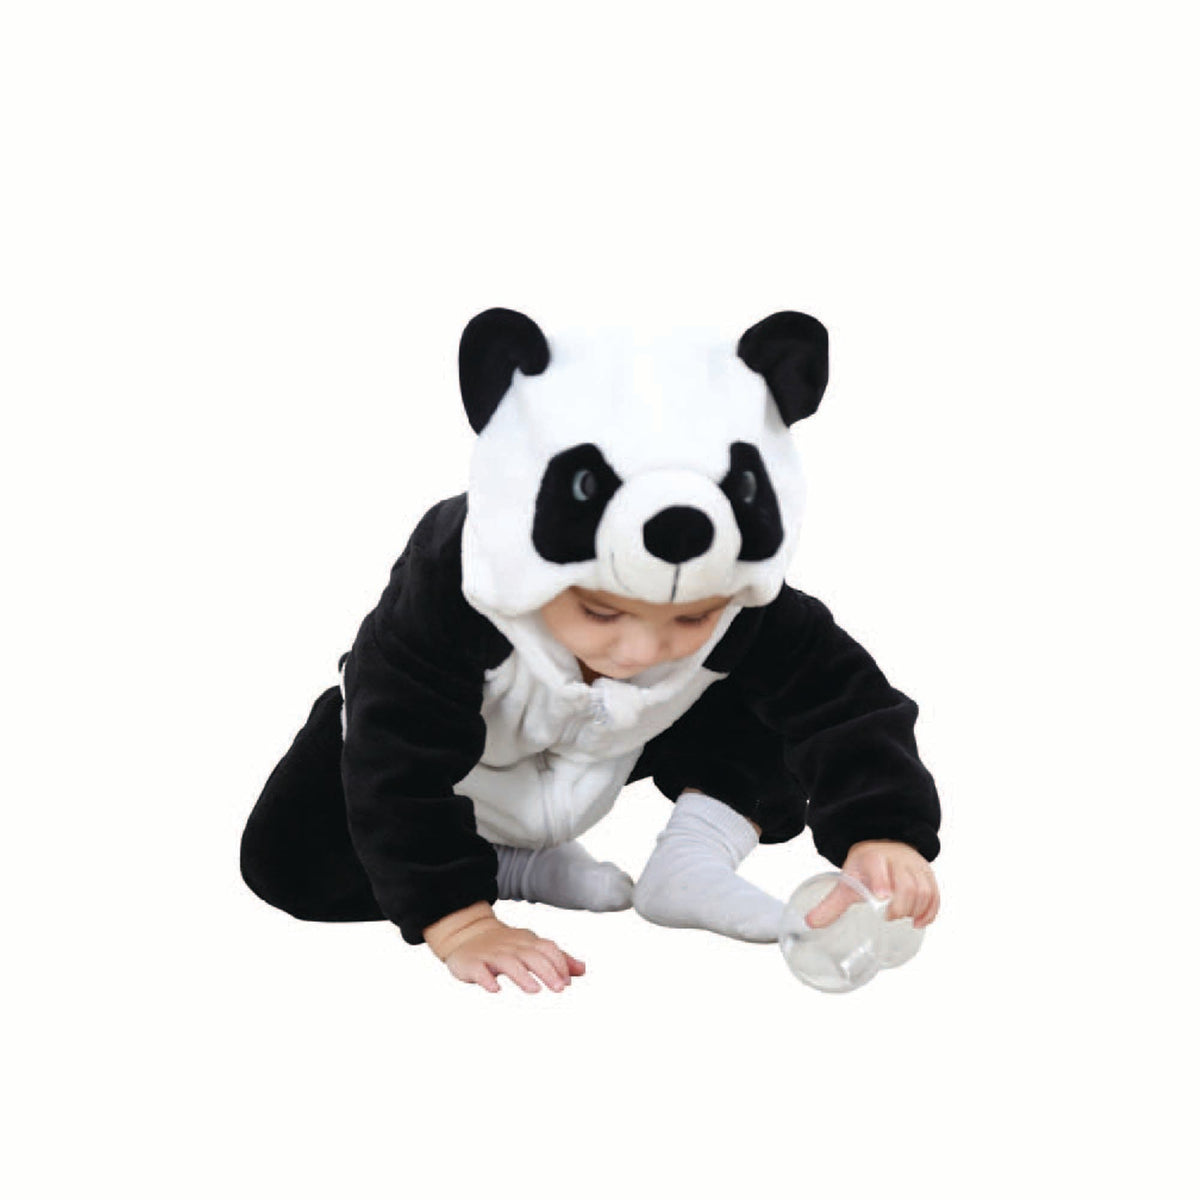 Seeing Red Inc. Costumes Little Panda Costume for Babies and Toddlers, Jumpsuit with Attached Hood